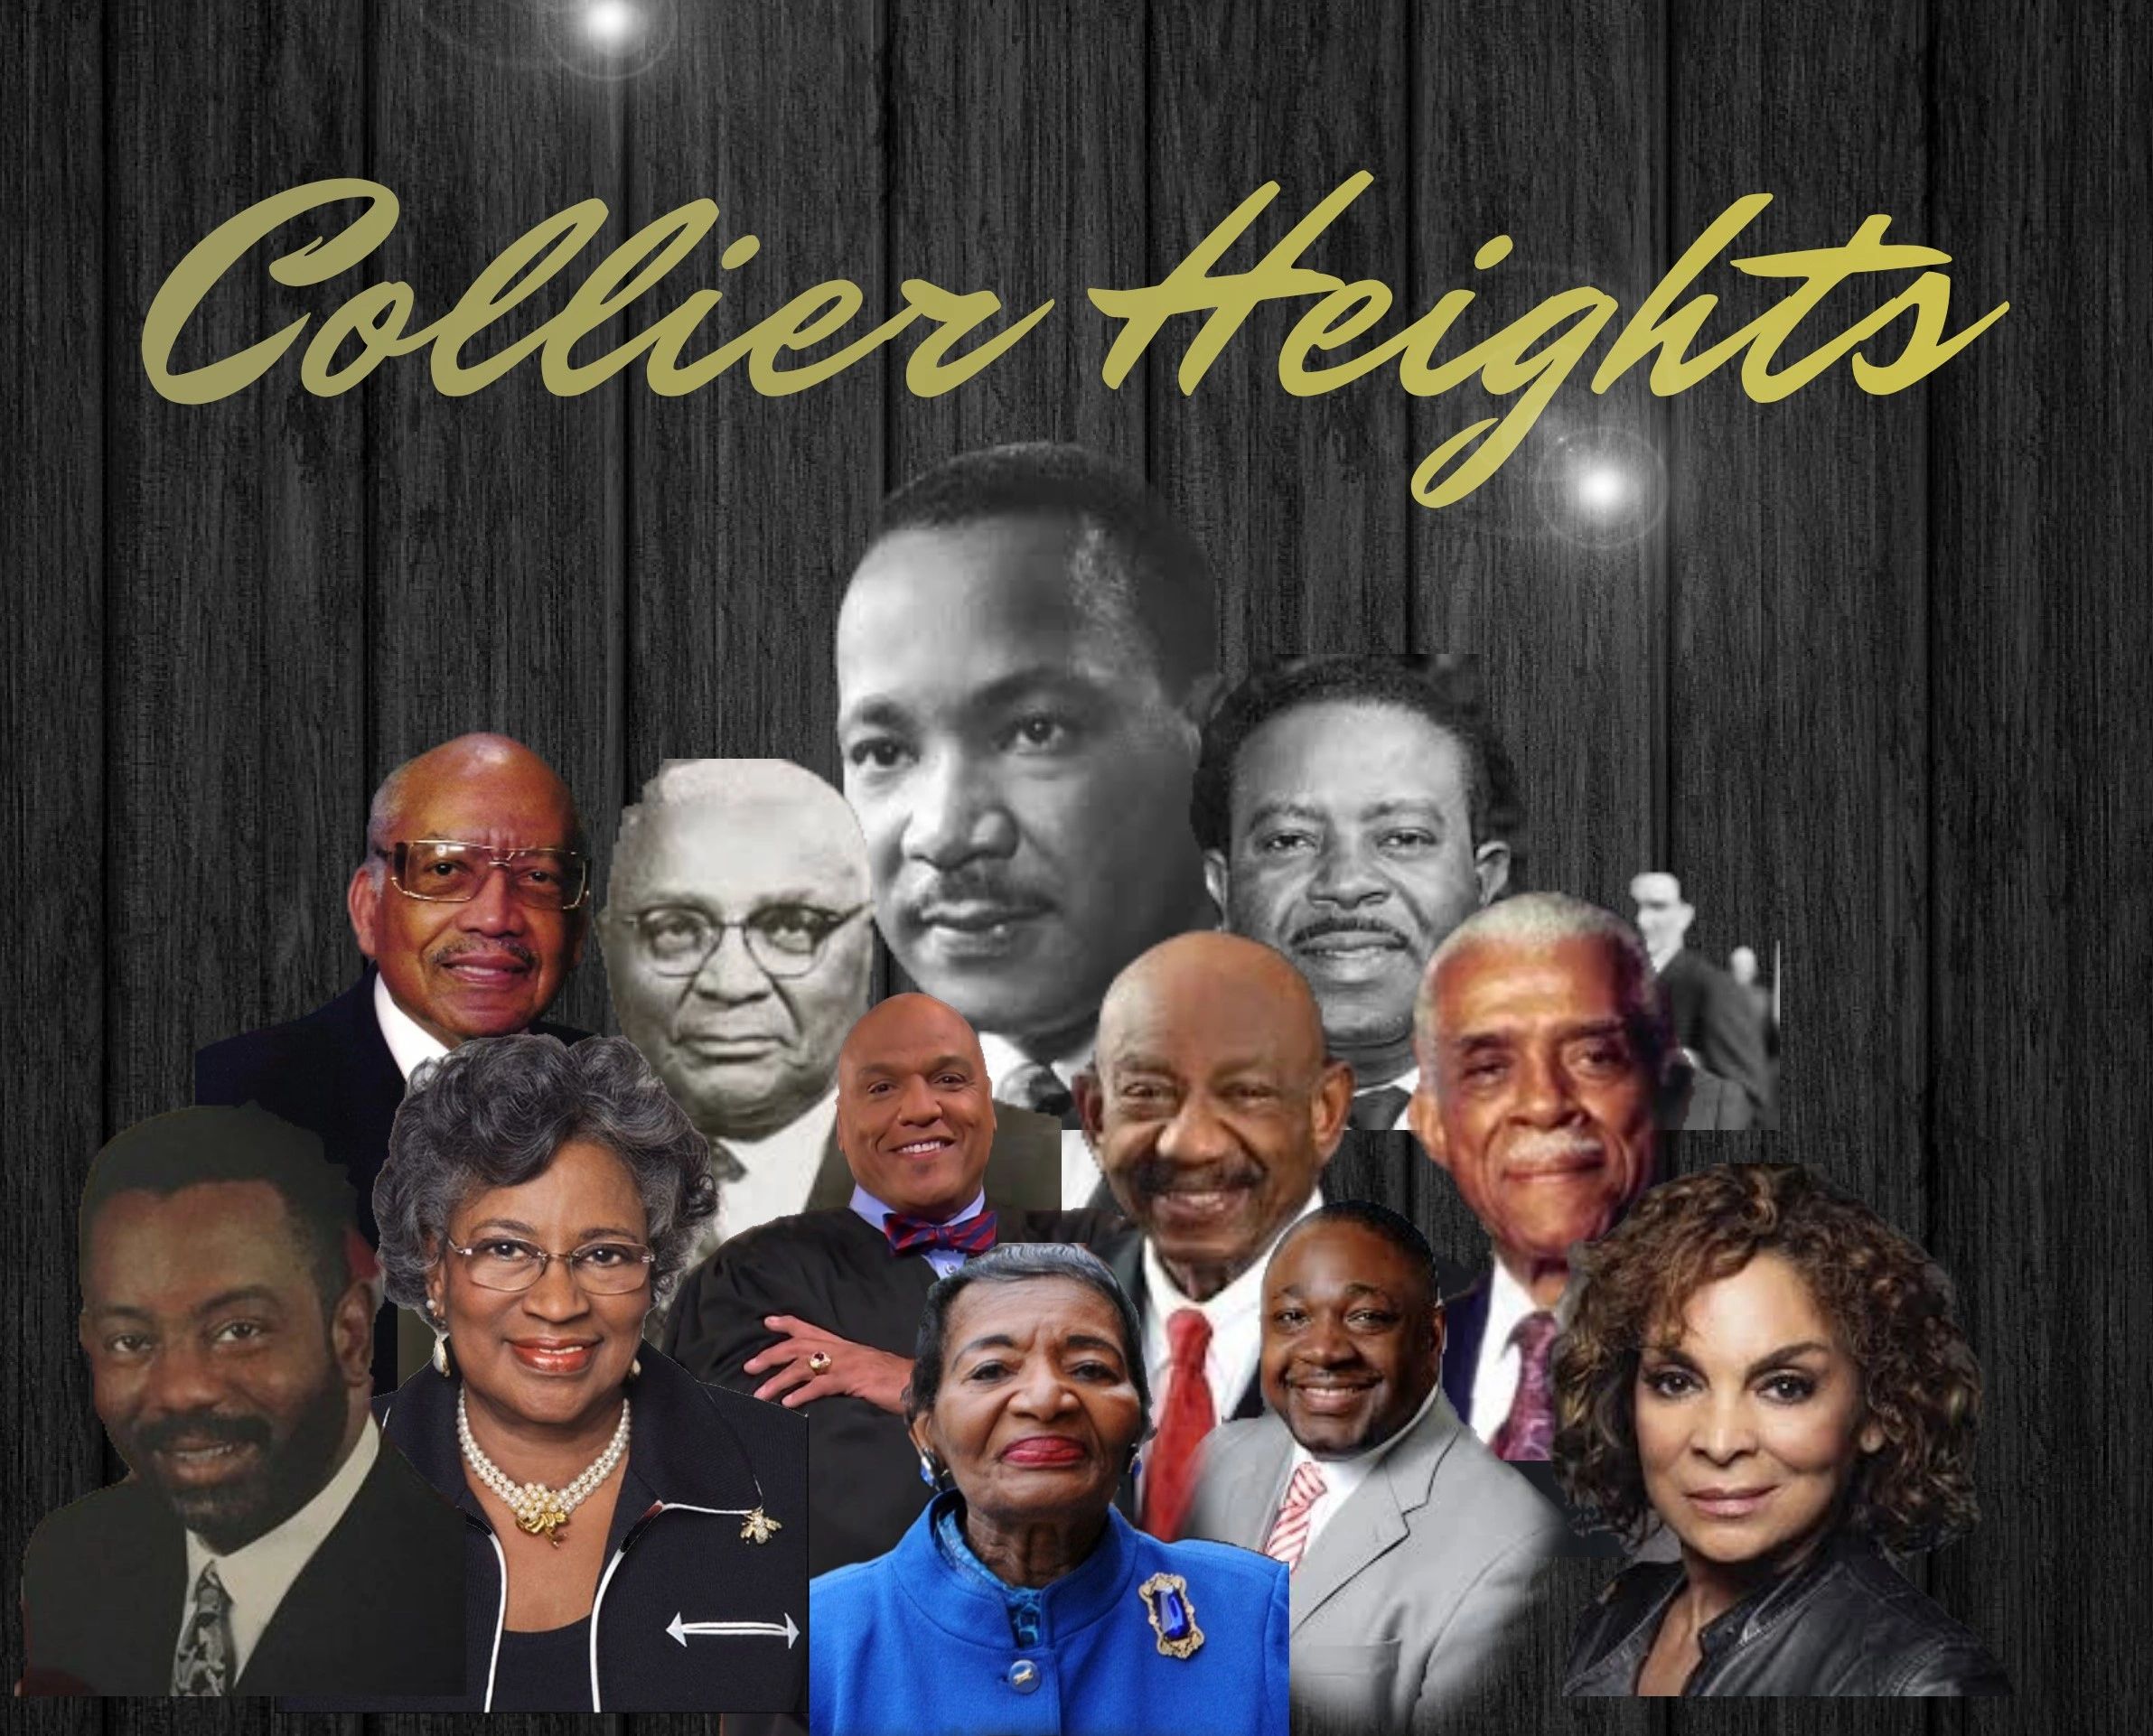 History Makers of Historic Collier Heights community